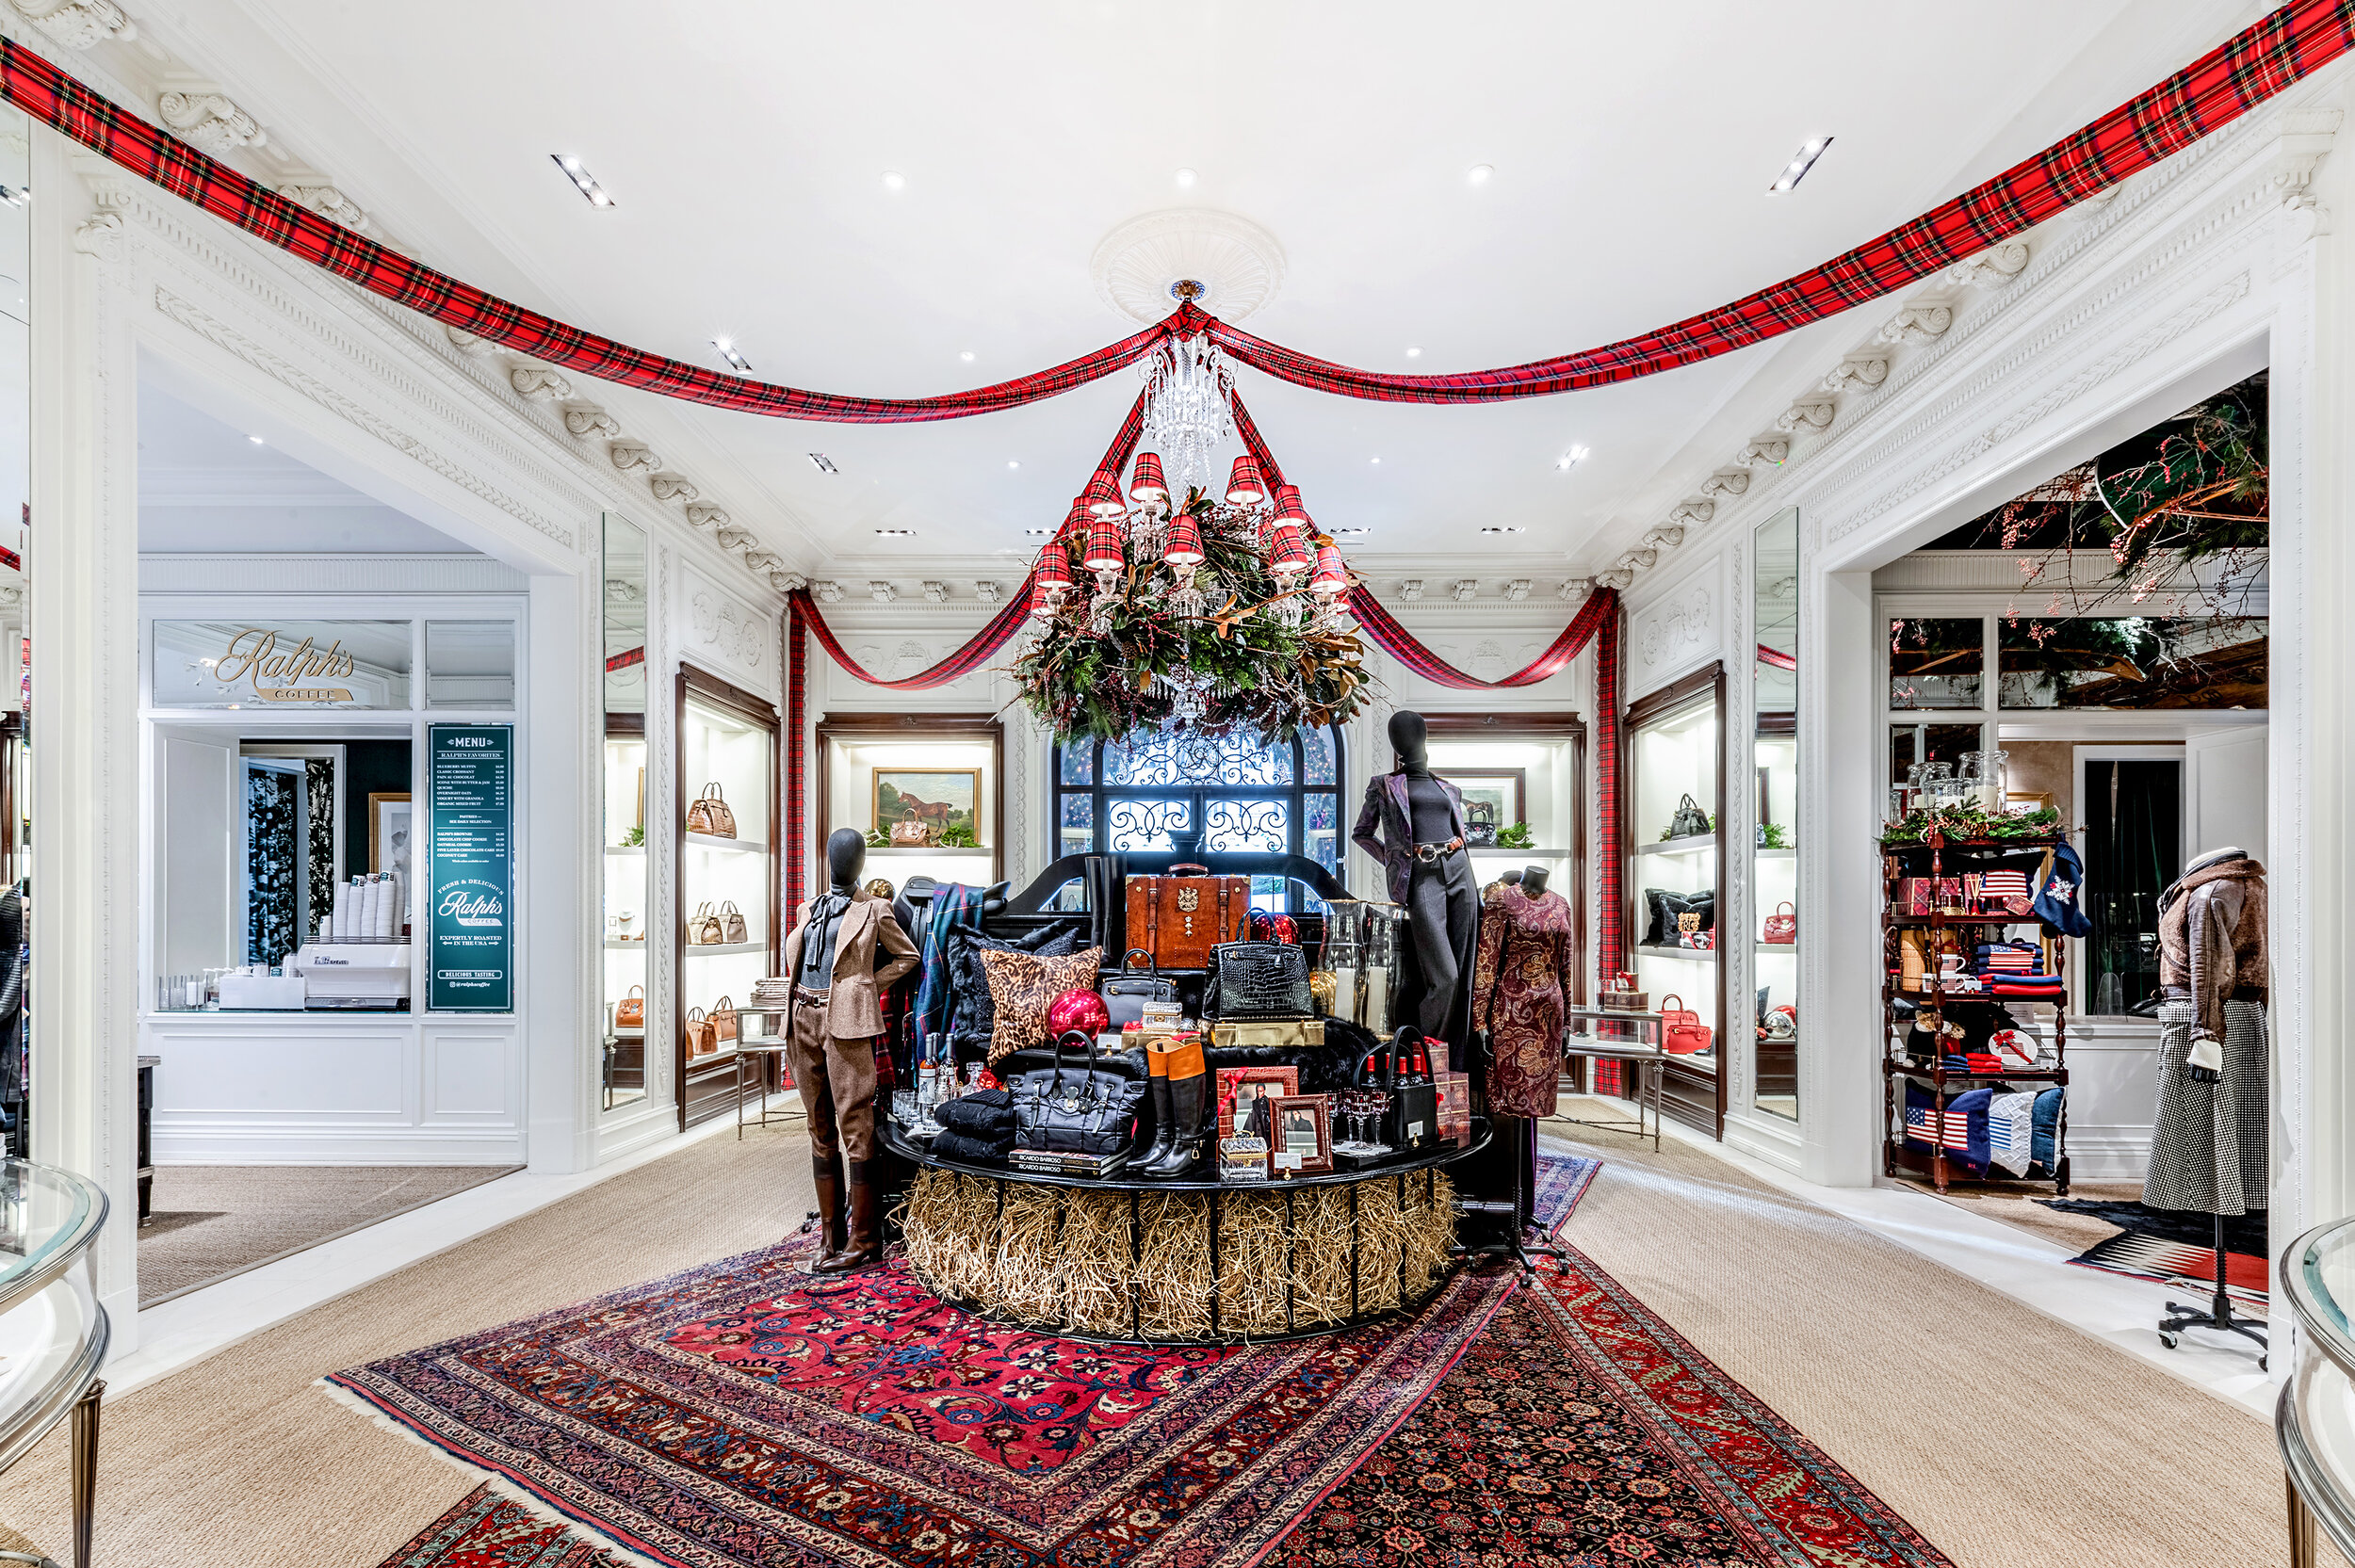 Ralph Lauren Women's NYC Flagship Holiday 2020 1 - photo by Andrew Werner.jpg